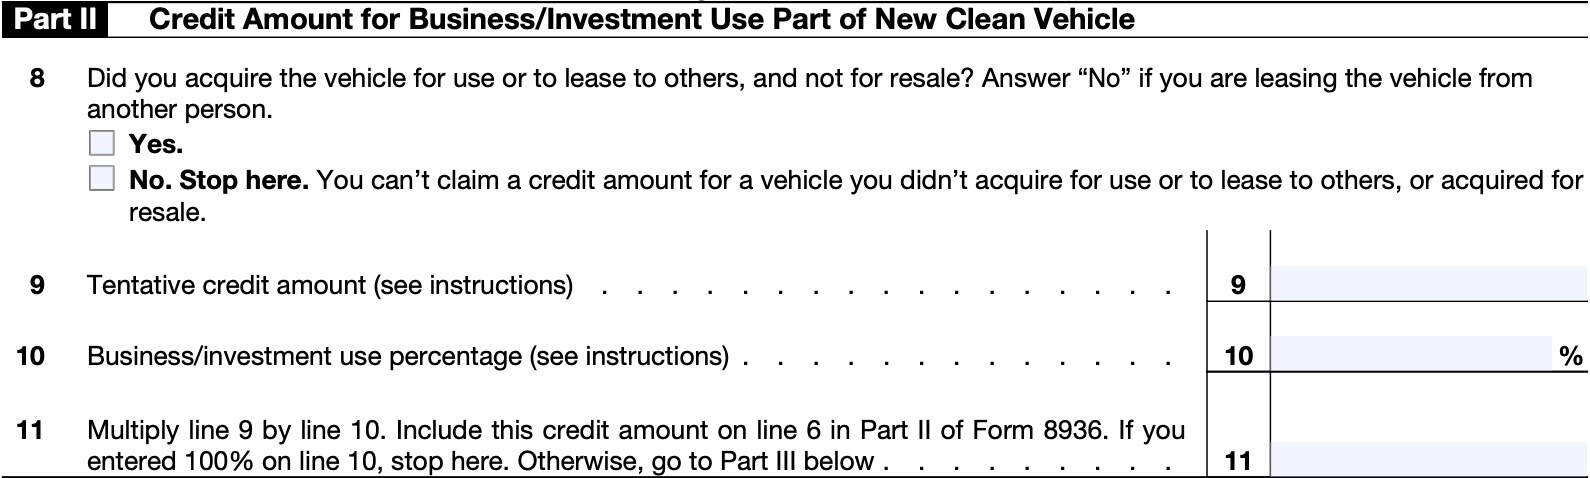 irs form 8936, schedule a, part ii: credit amount for business or investment use part of new clean vehicle